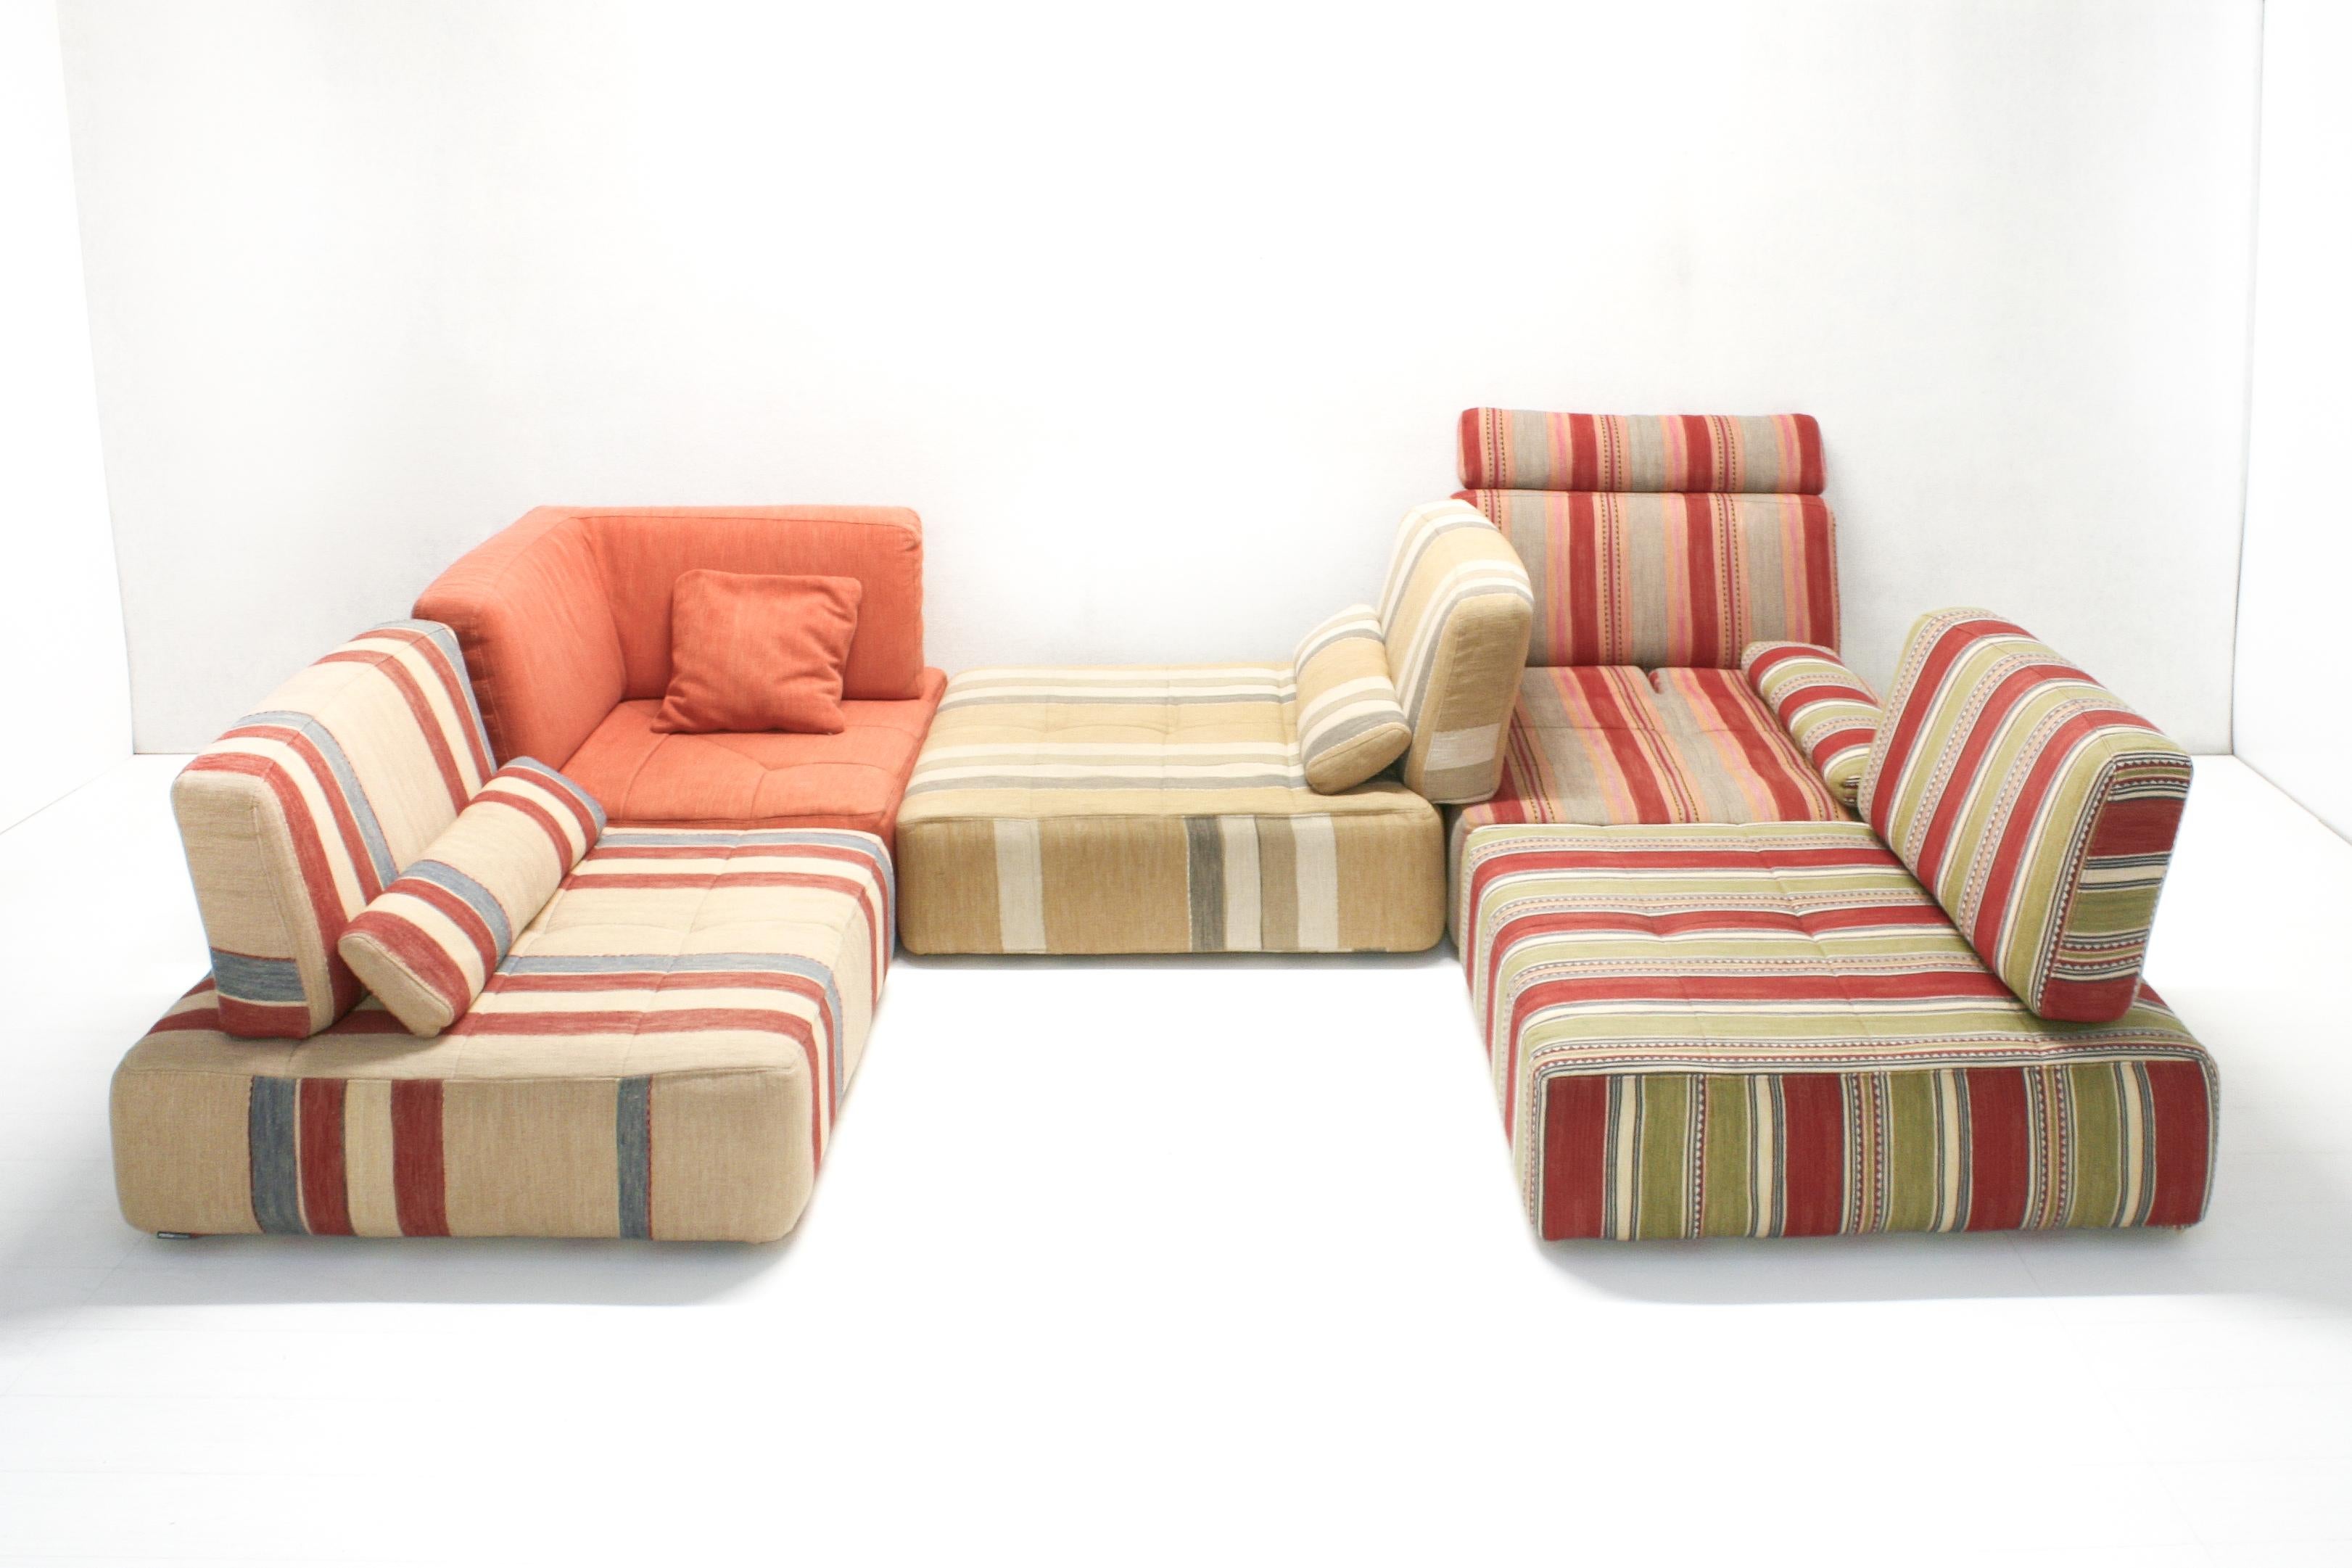 Contemporary Modular Parcours Voyage Immobile Fabric Sofa by Sacha Lakic for Roche Bobois